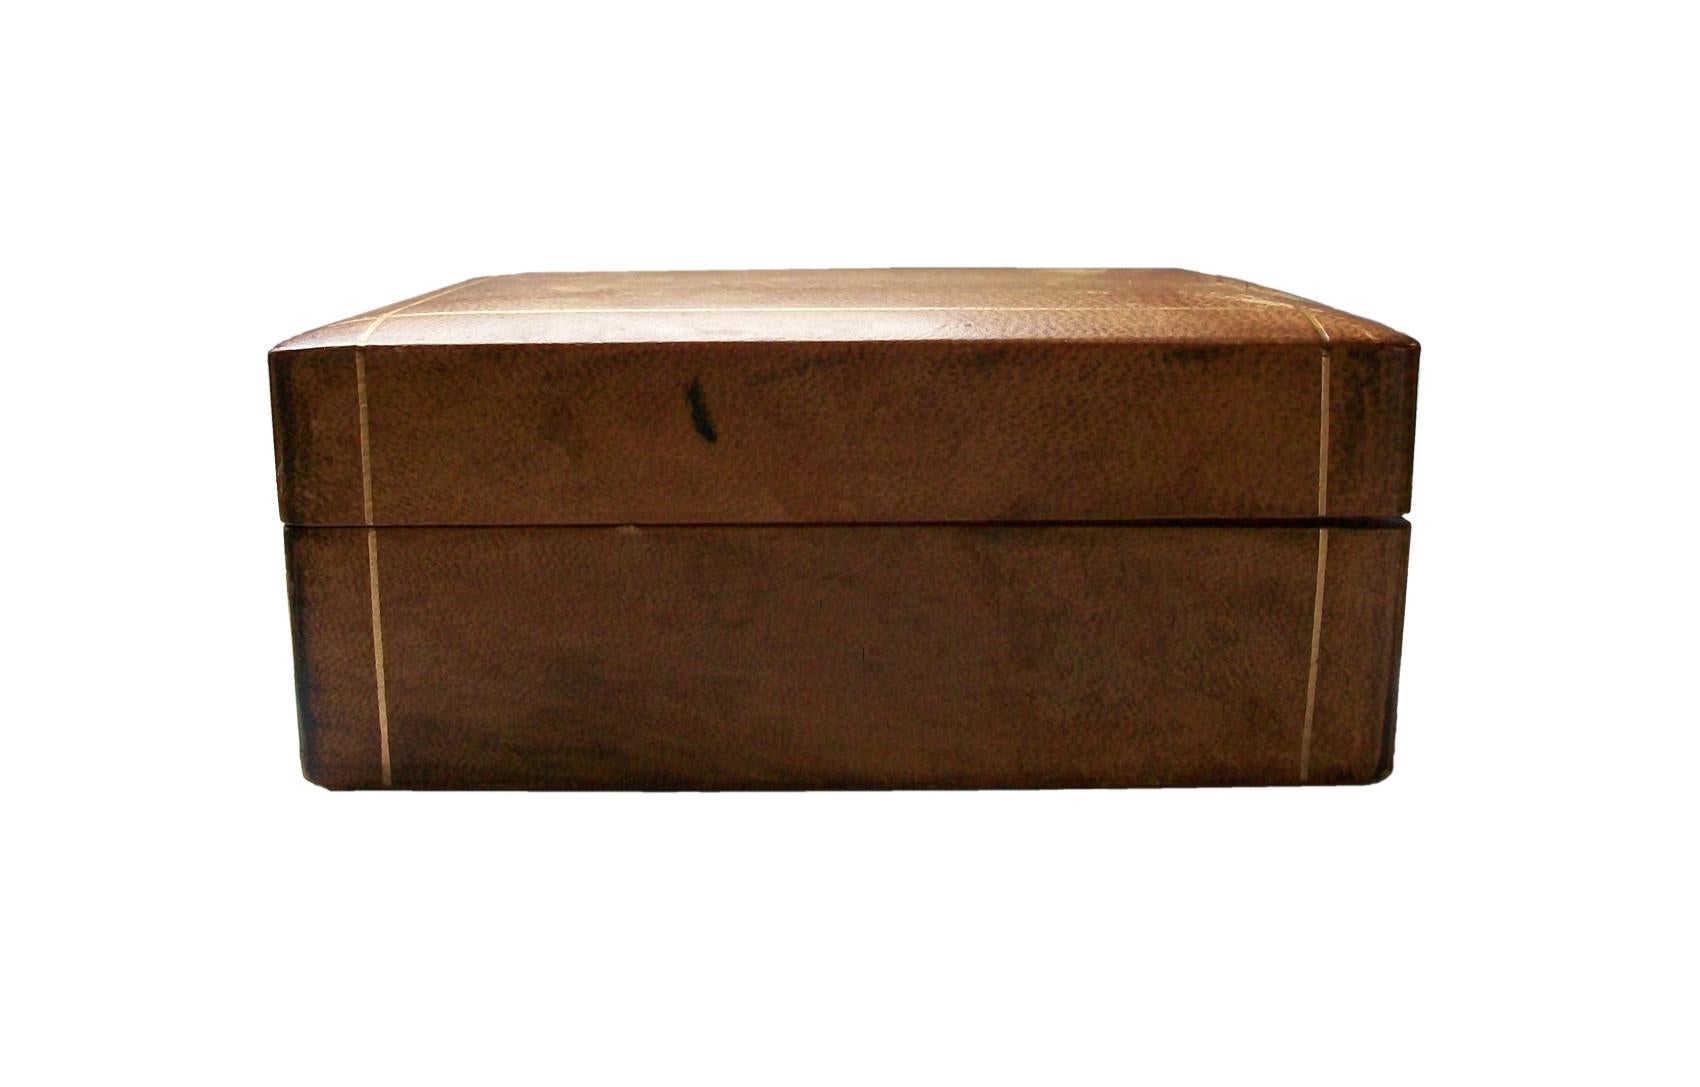 Mid-Century Modern Midcentury Leather Box - Gilded Details - Wood Lined - Italy - circa 1950s For Sale